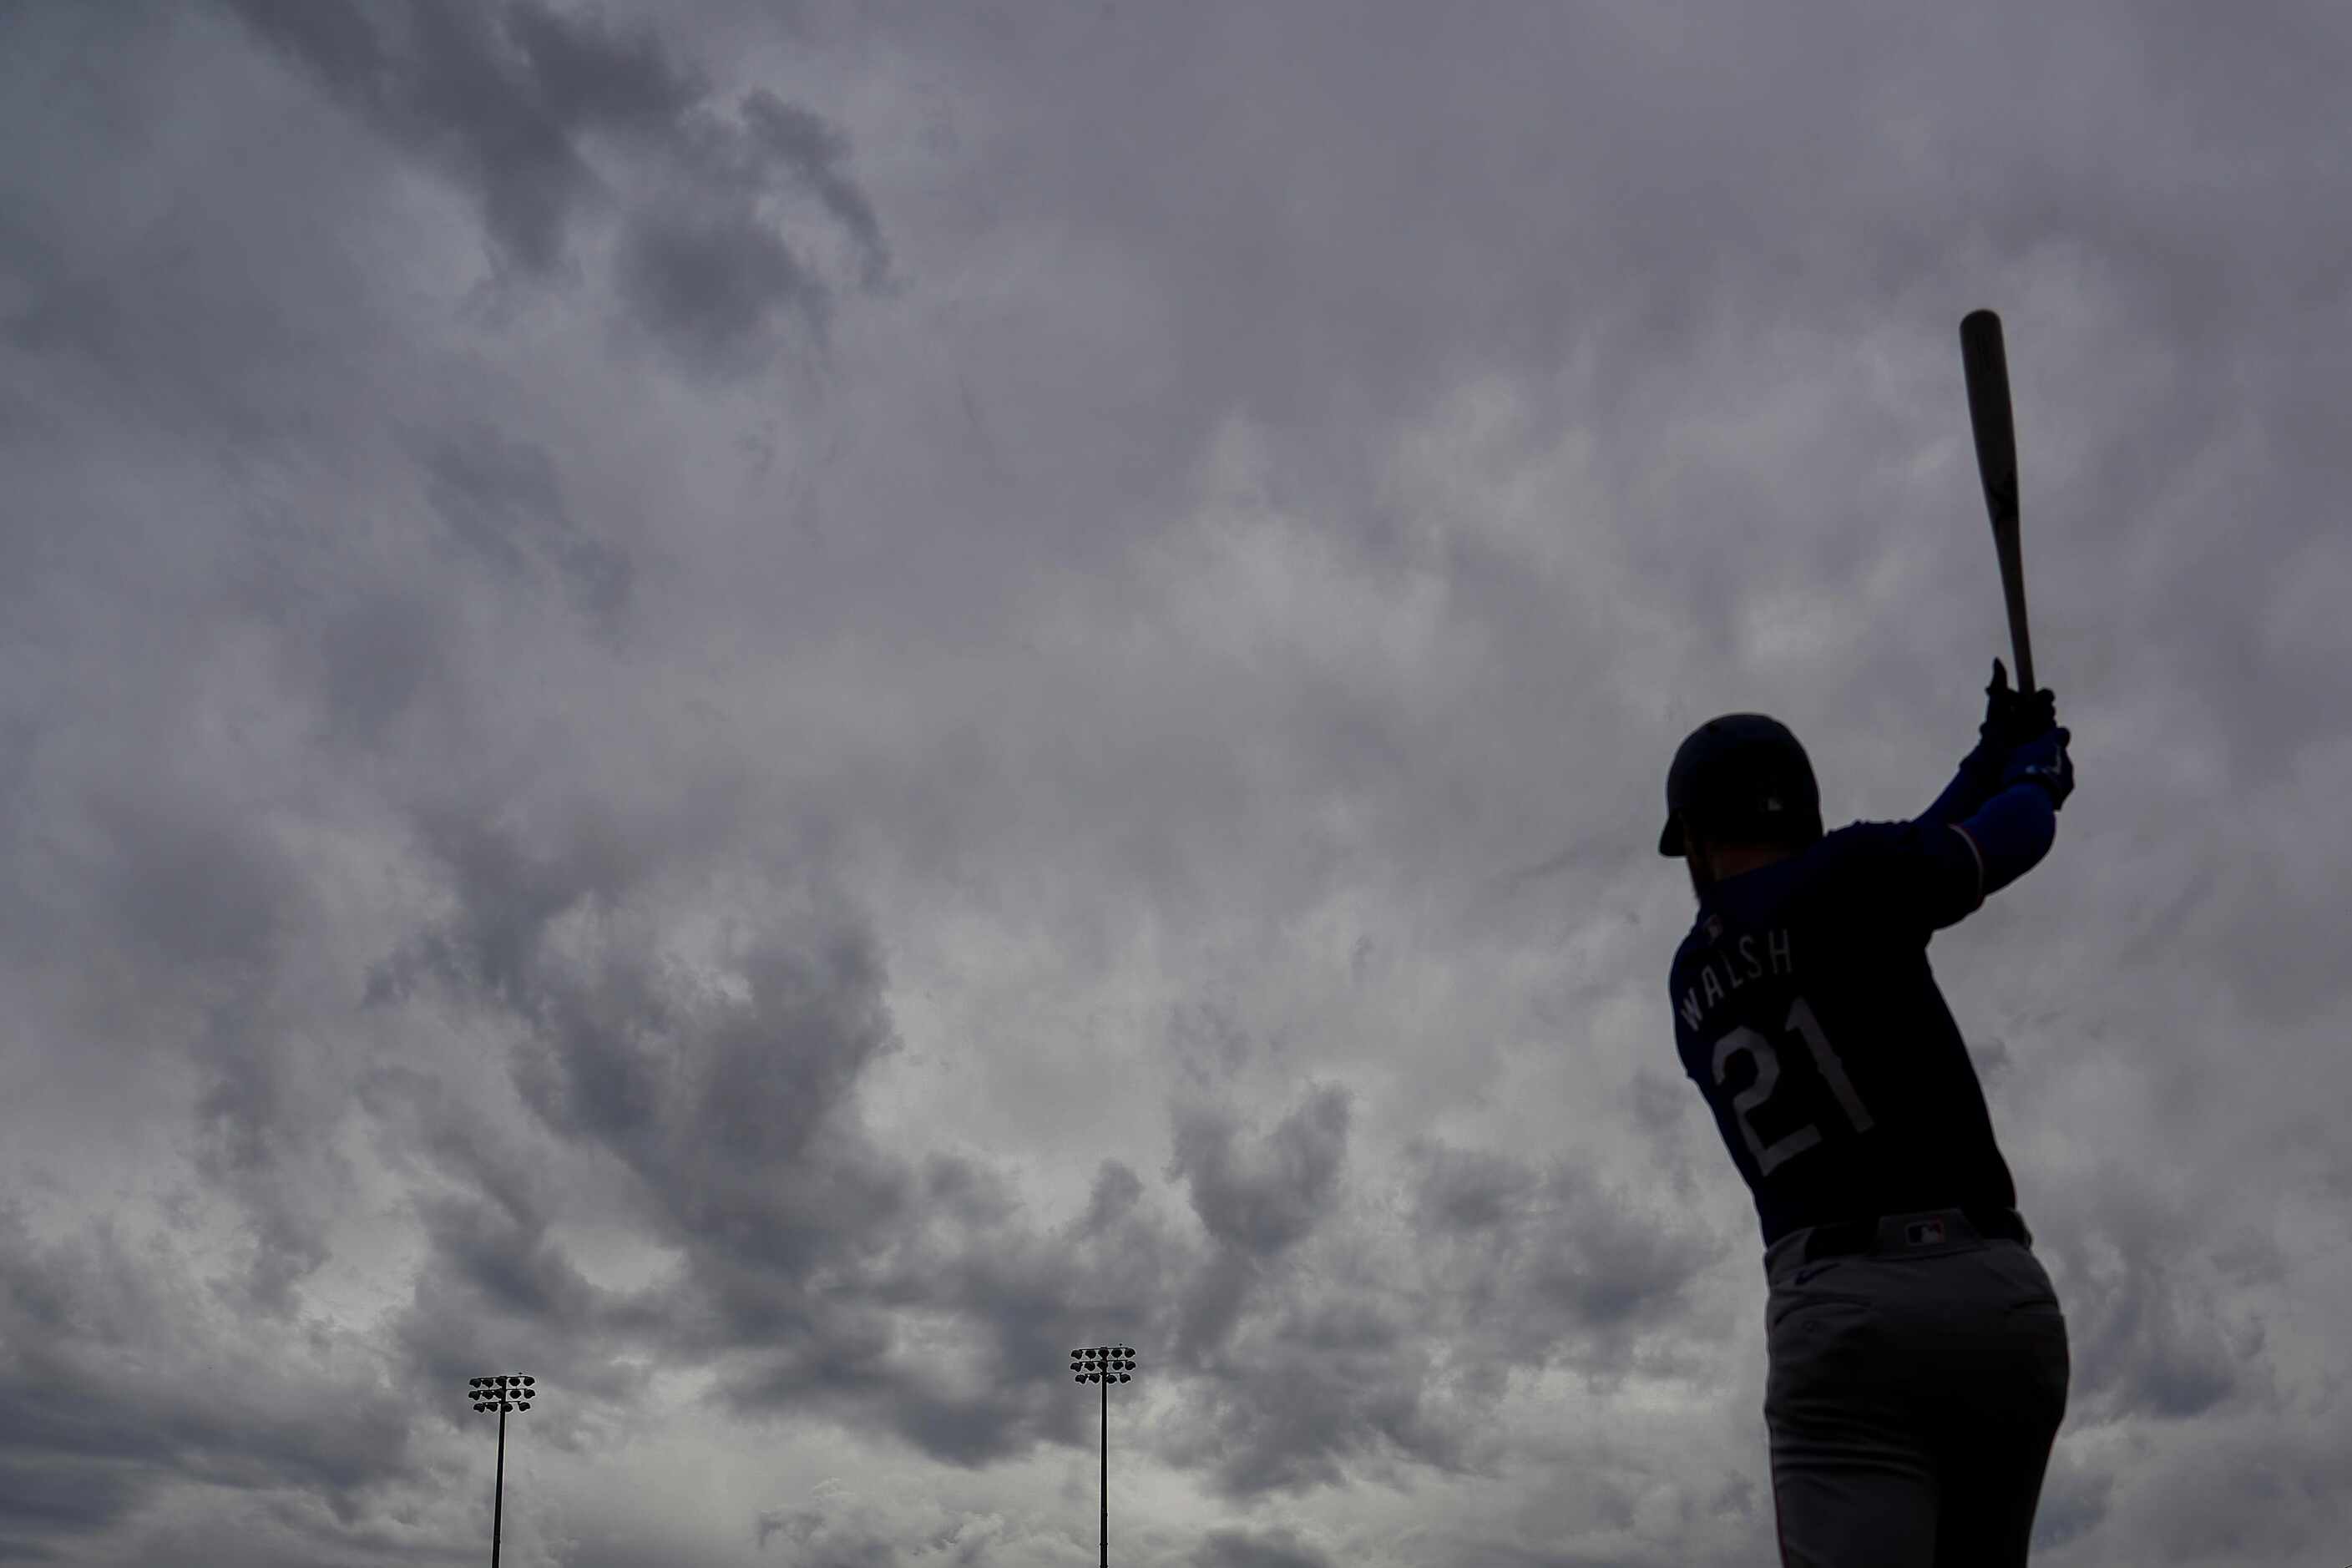 Texas Rangers infielder Jared Walsh takes a warmup swing before a spring training game...